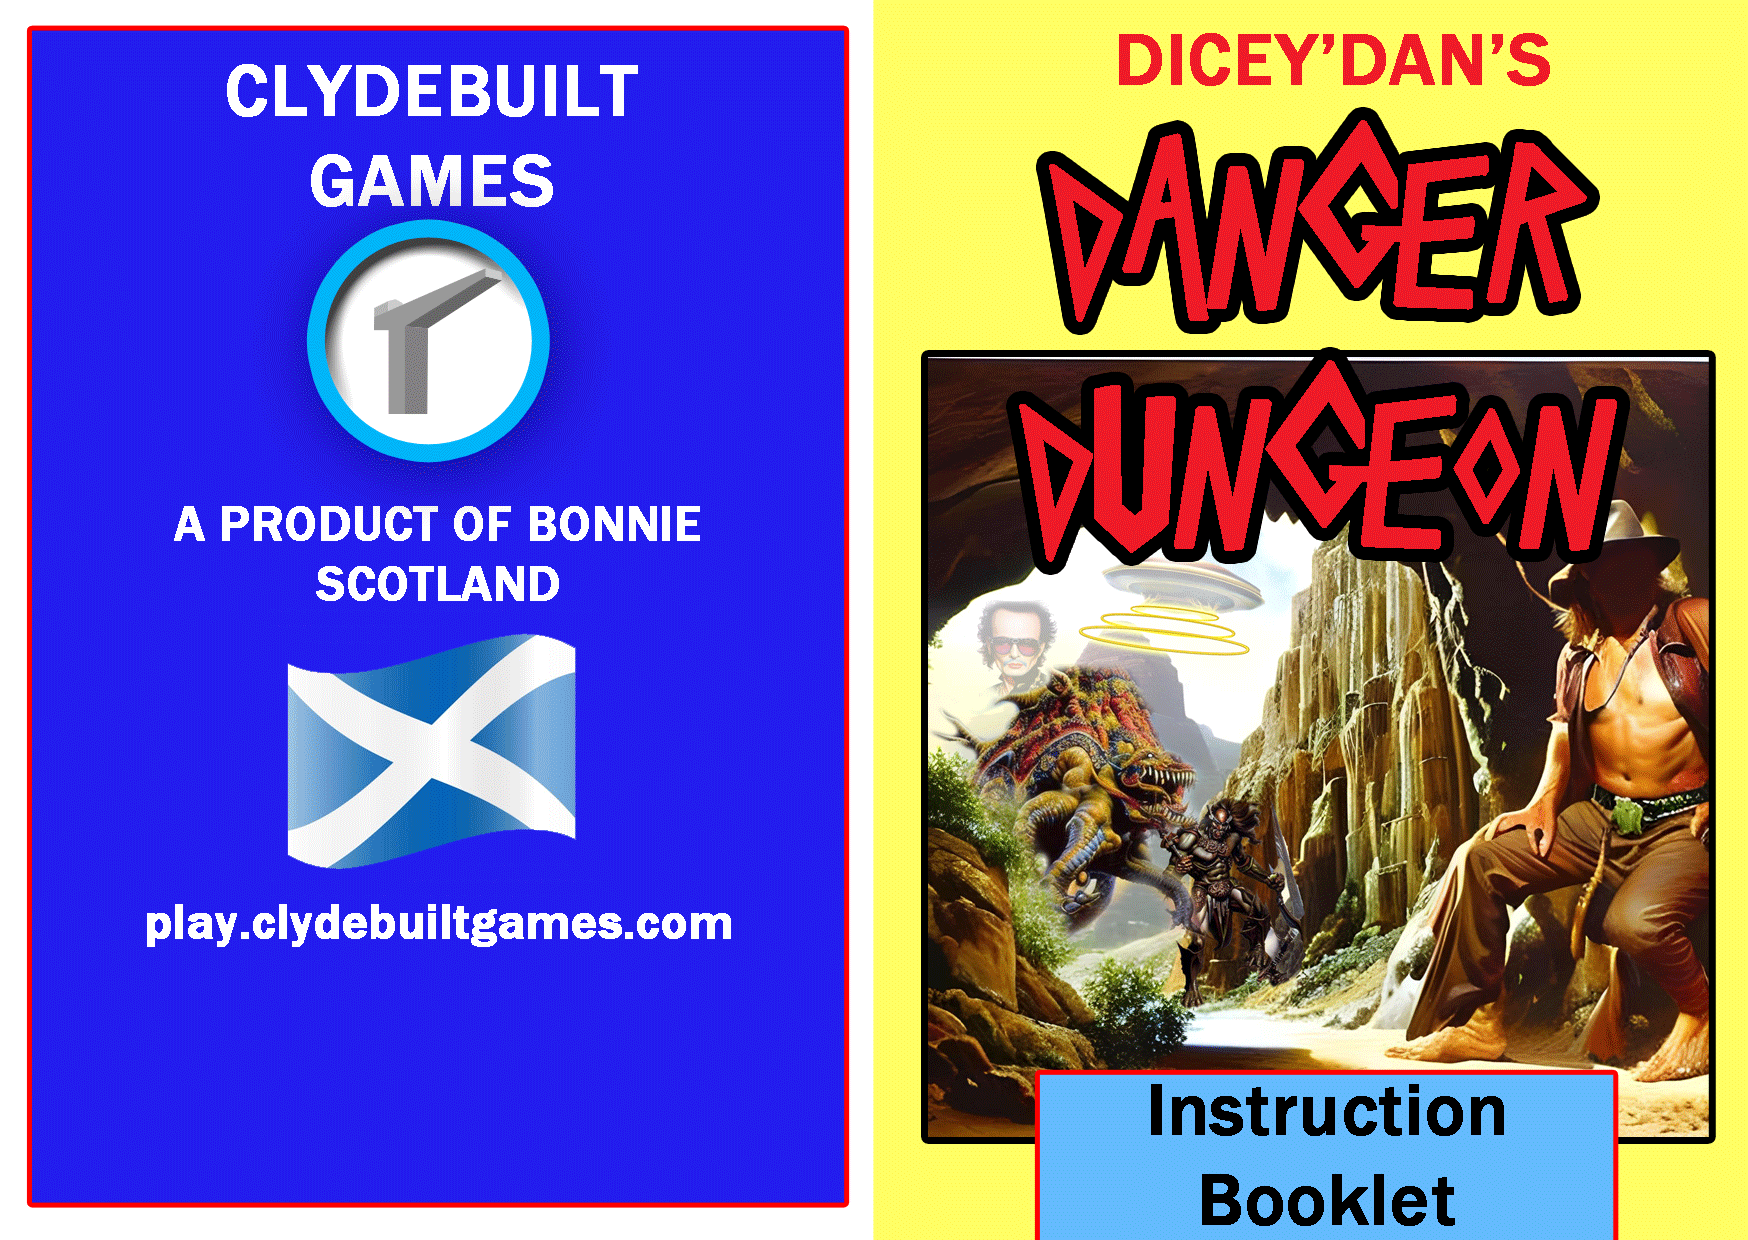 DICEY DAN'S DANGER DUNGEON. INSTRUCTION MANUAL. A PRODUCT OF BONNIE SCOTLAND